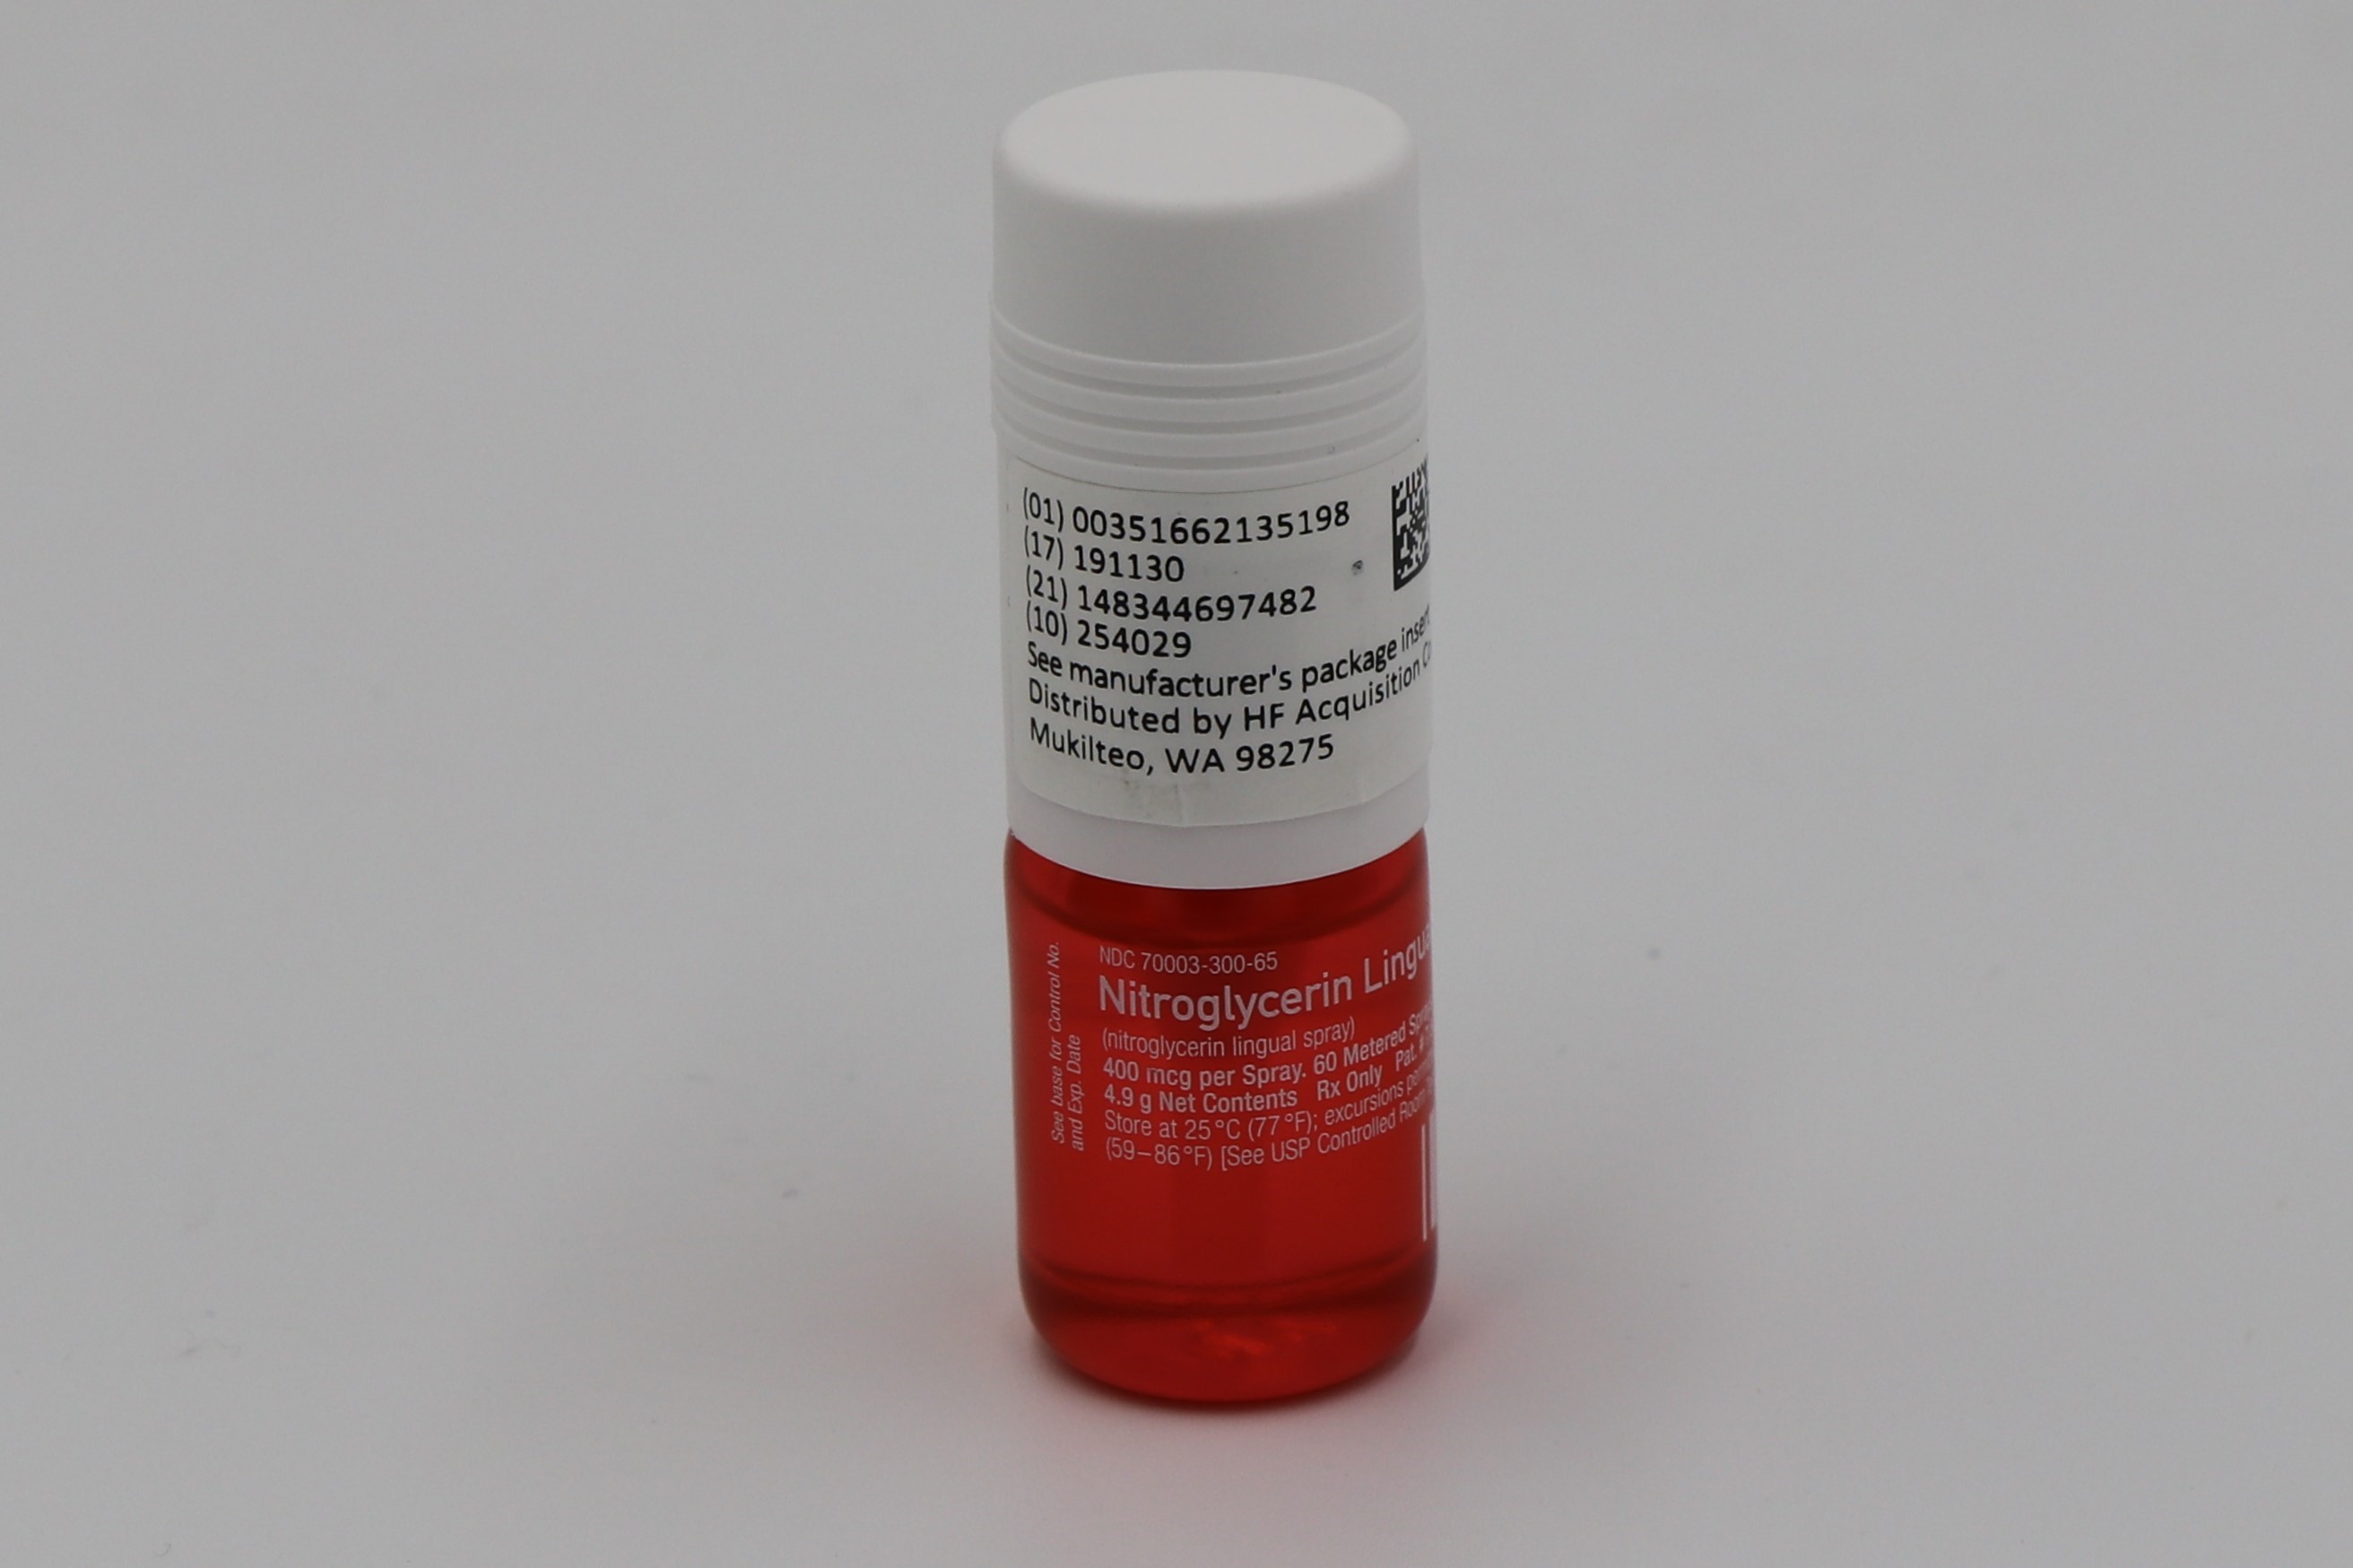 SERIALIZED LABEL